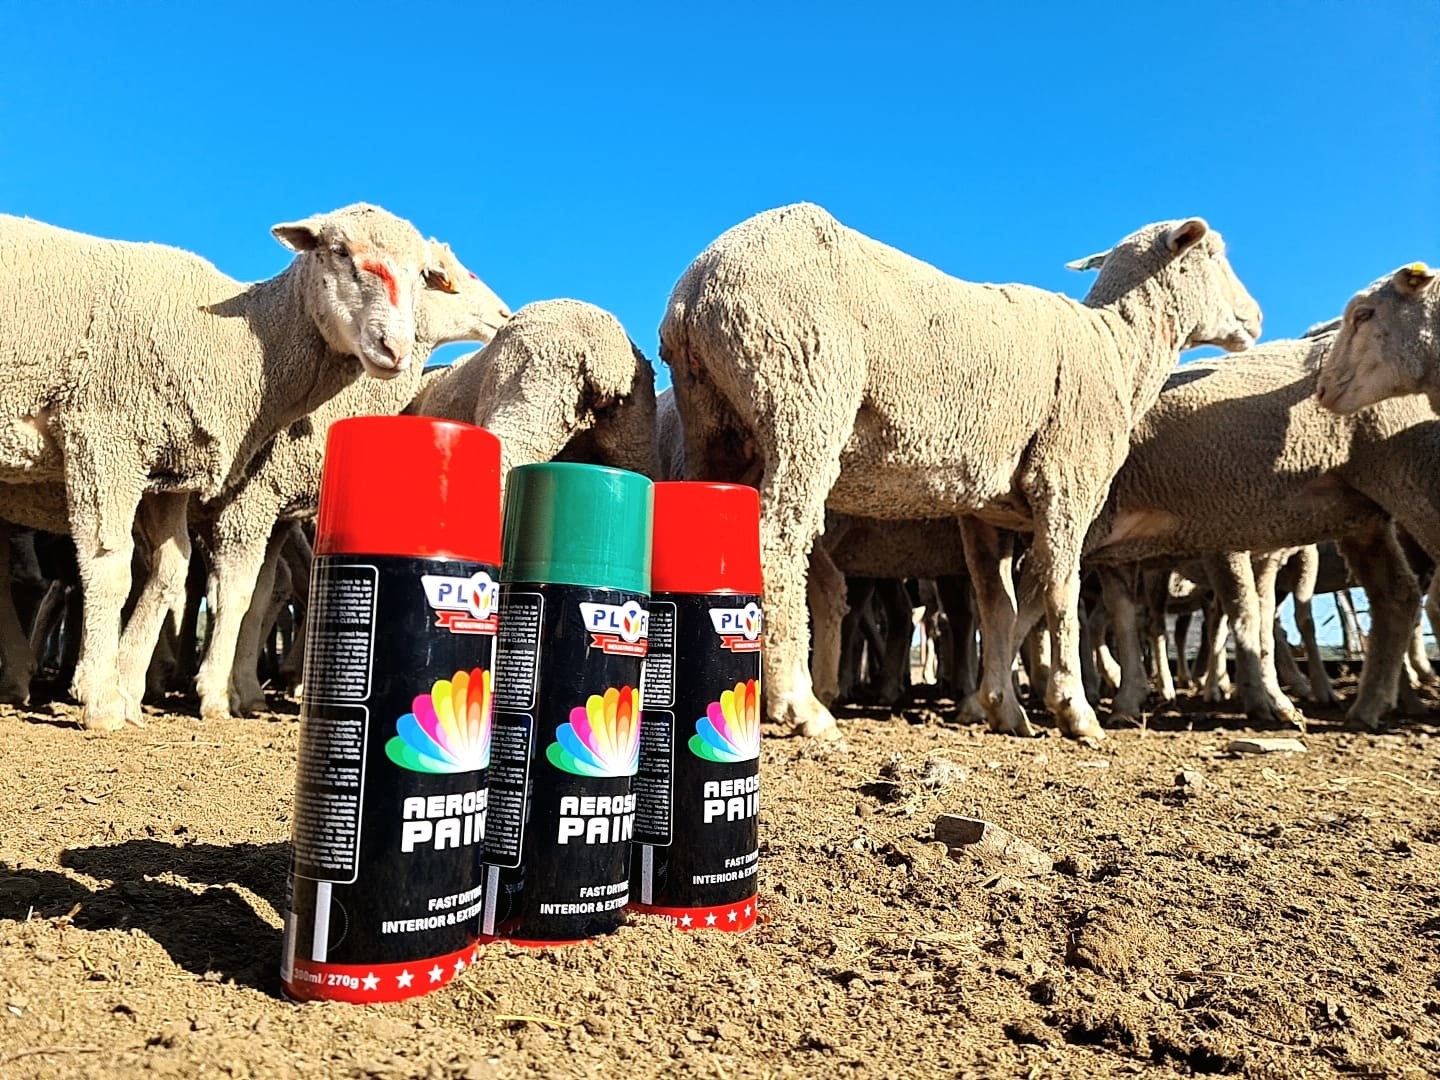  Plyfit Livestock Marker Spray No Harm Cow Sheep Marking Spray Paint Manufactures